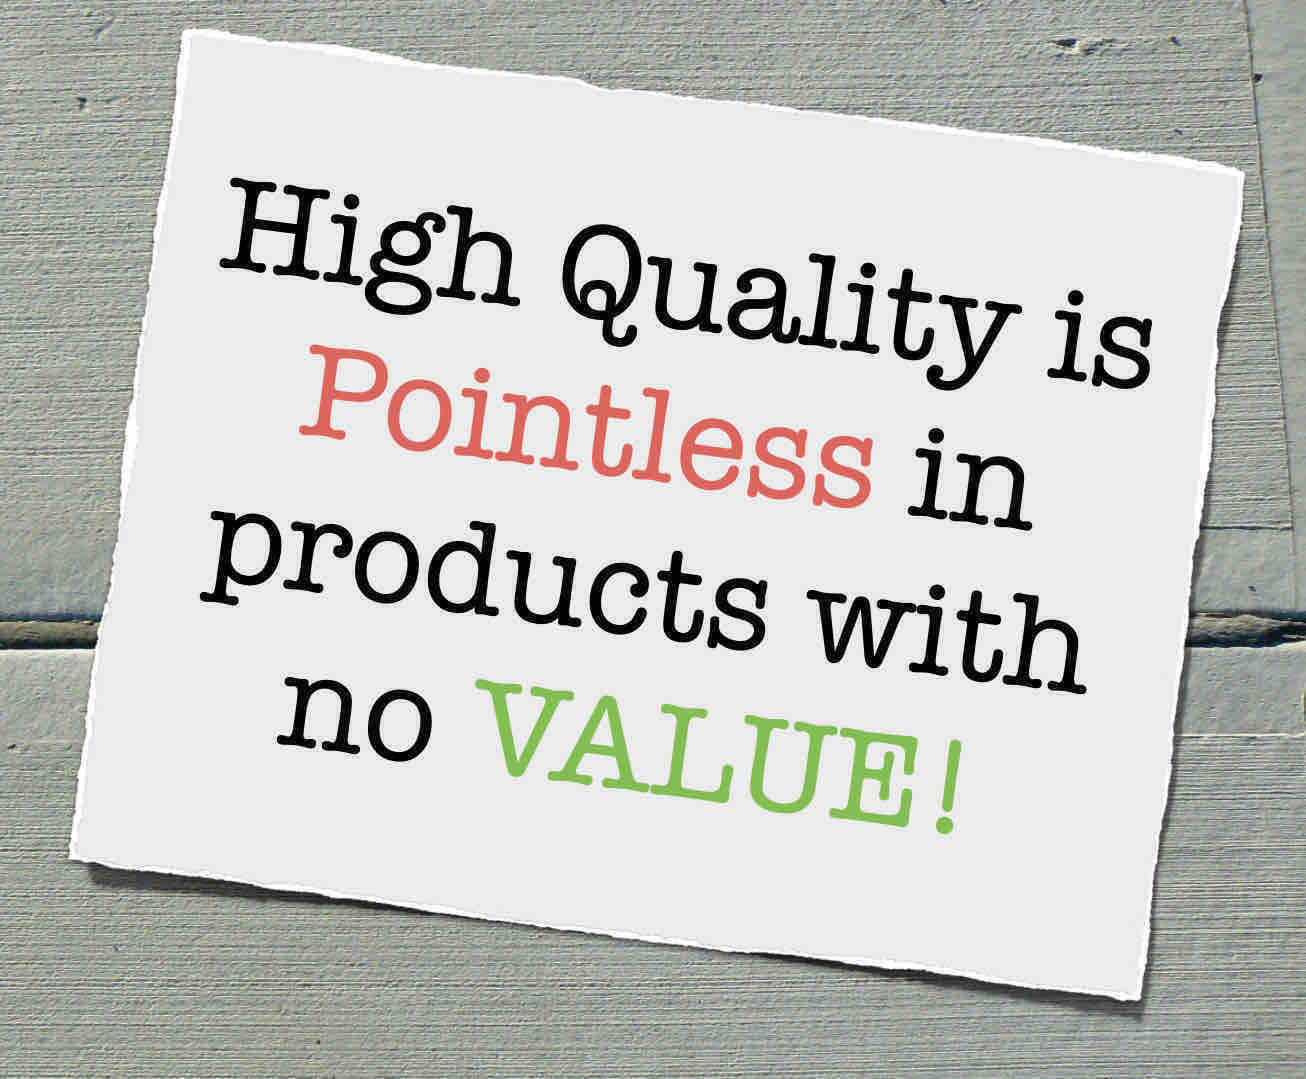 High quality is pointless in products with no value.